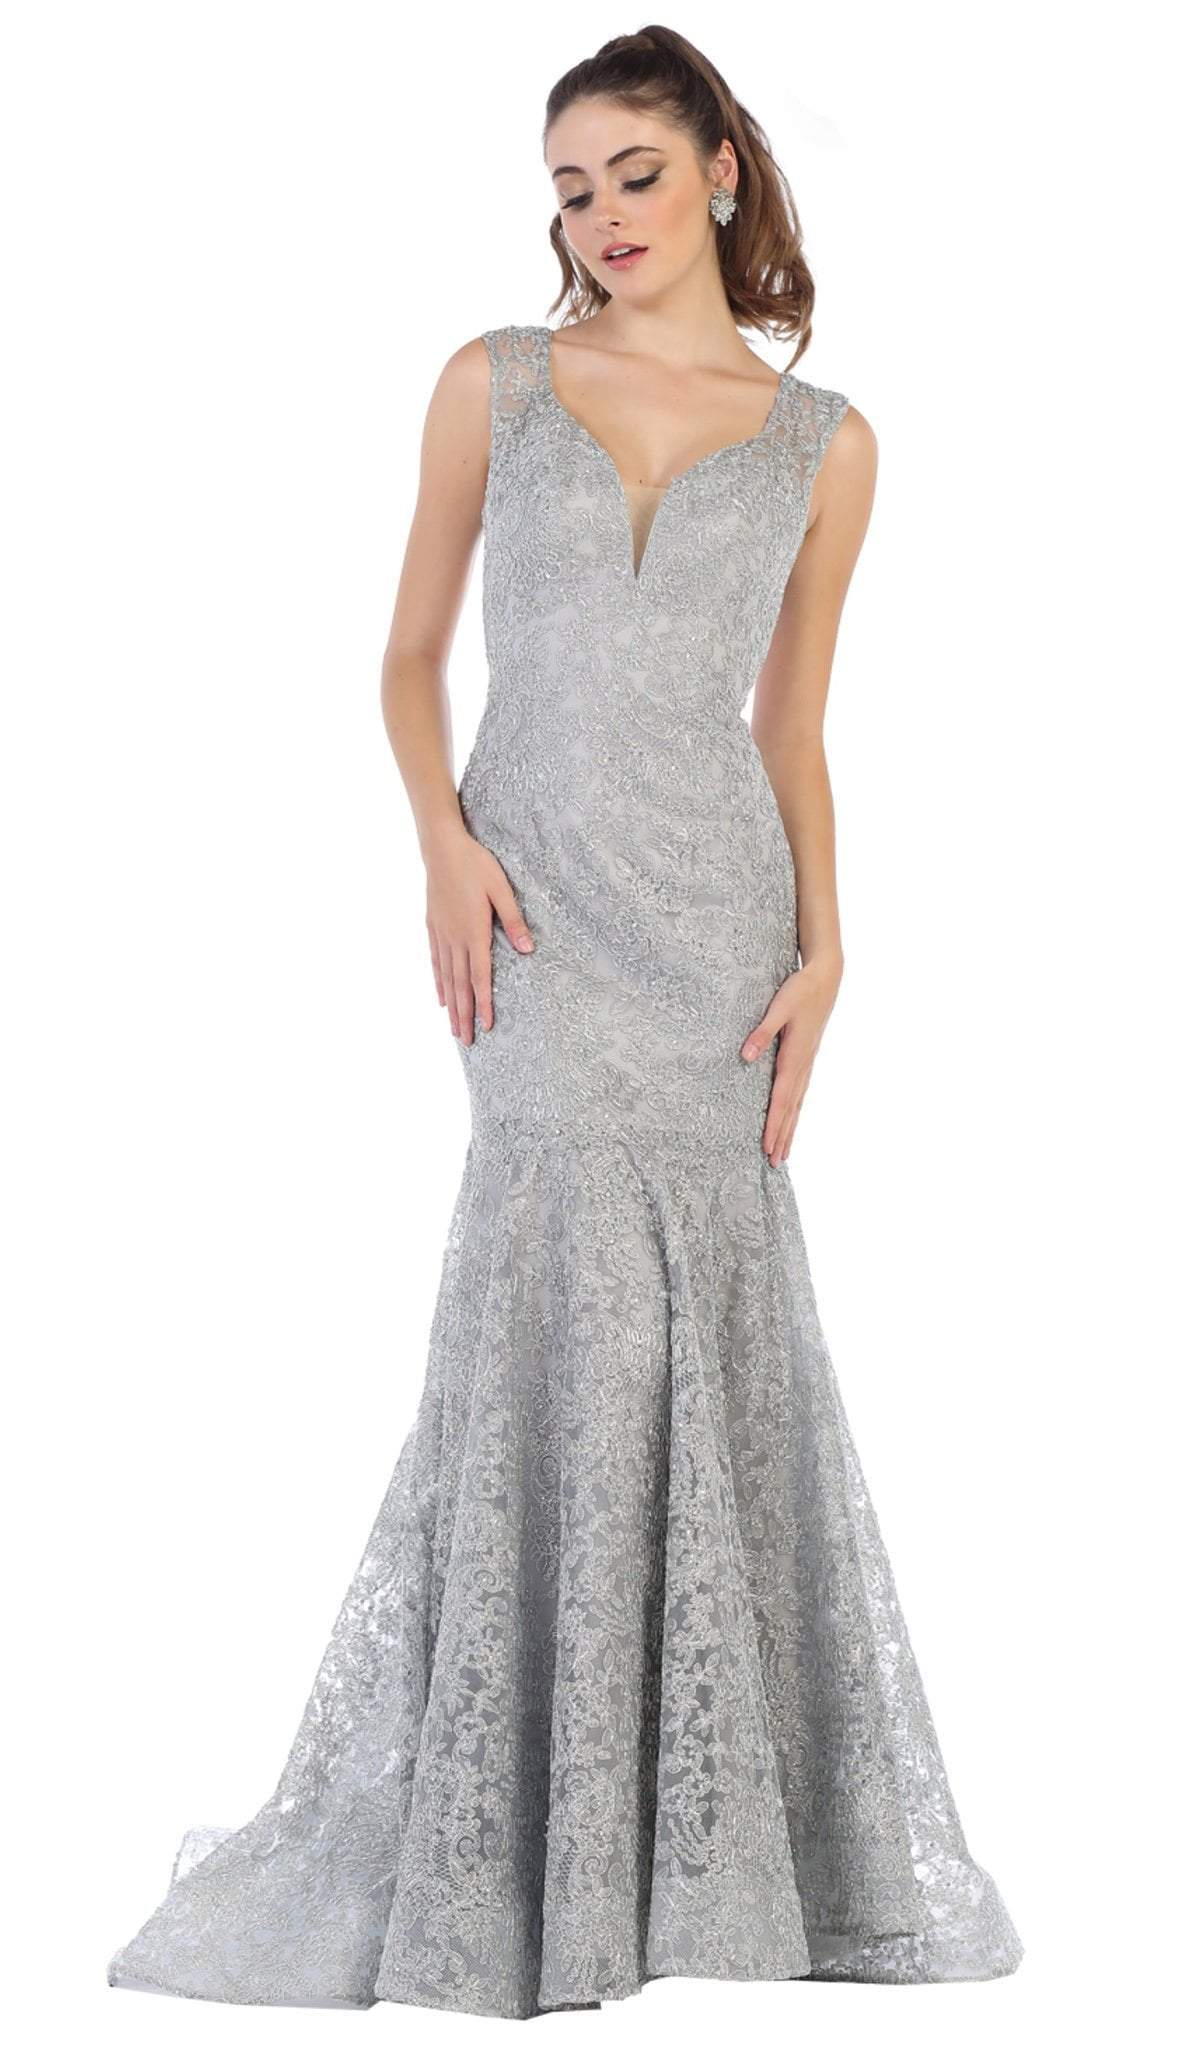 May Queen - RQ7635 Embellished Plunging V-neck Mermaid Dress Special Occasion Dress 2 / Silver